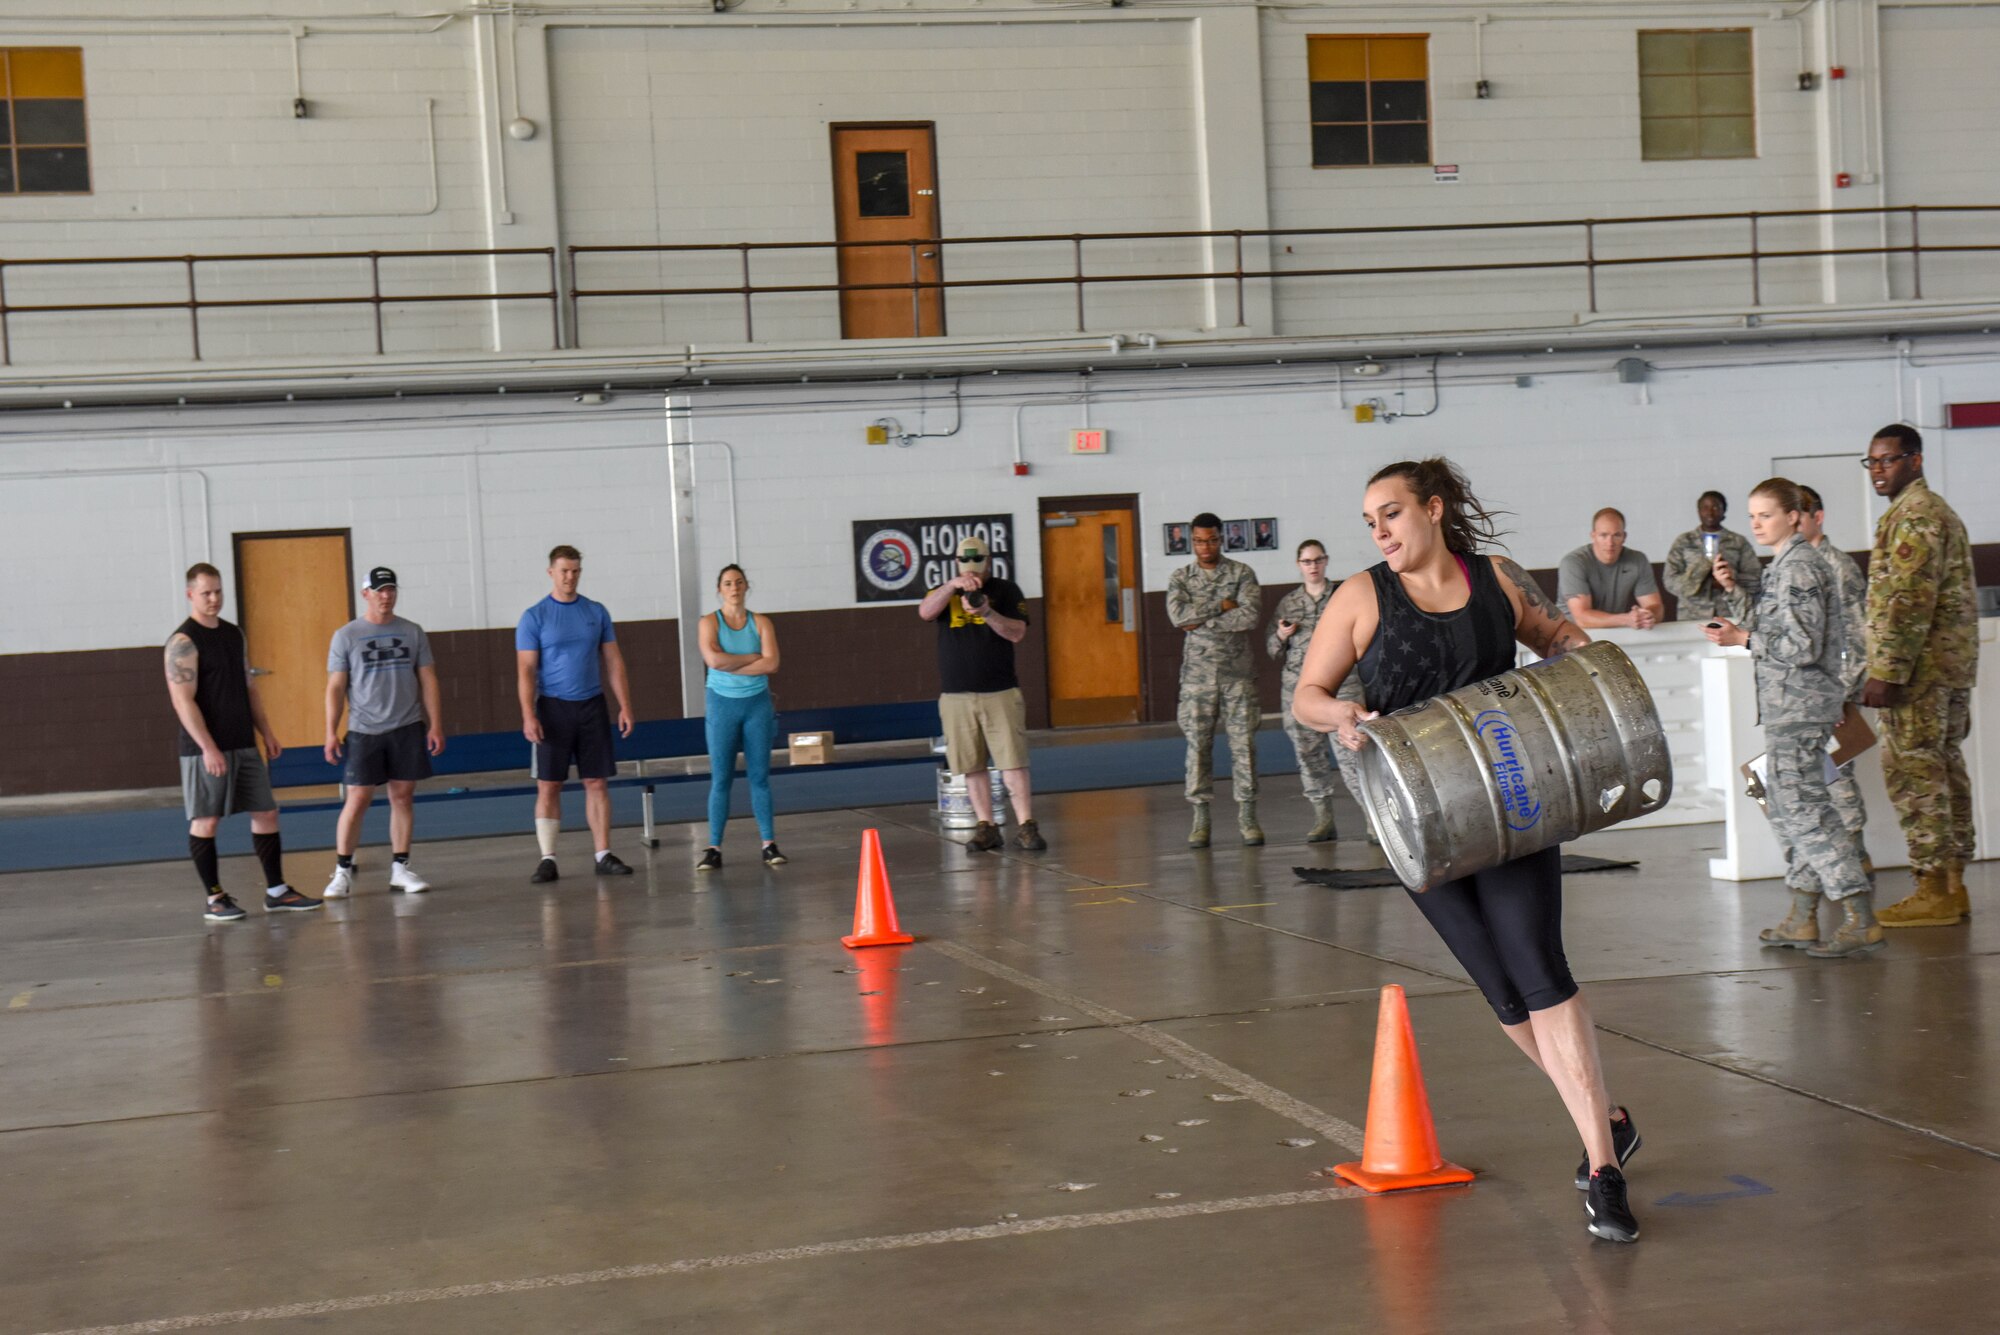 Staff Sgt. Brittany Binder, the 28th Force Support Squadron Fitness Assessment Cell noncommissioned officer in charge, runs while carrying a full-barrel keg during the Ellsworth Air Force Base’s Strongest Competition at the Pride Hangar on Ellsworth AFB, S.D., April 25, 2019. Half full of sand, the keg weighed between 60-70 pounds. Binder, who placed second in the female division, decided to compete because she wanted a new challenge that would bring her out of her comfort zone. (U.S. Air Force photo by Tech. Sgt. Jette Carr)